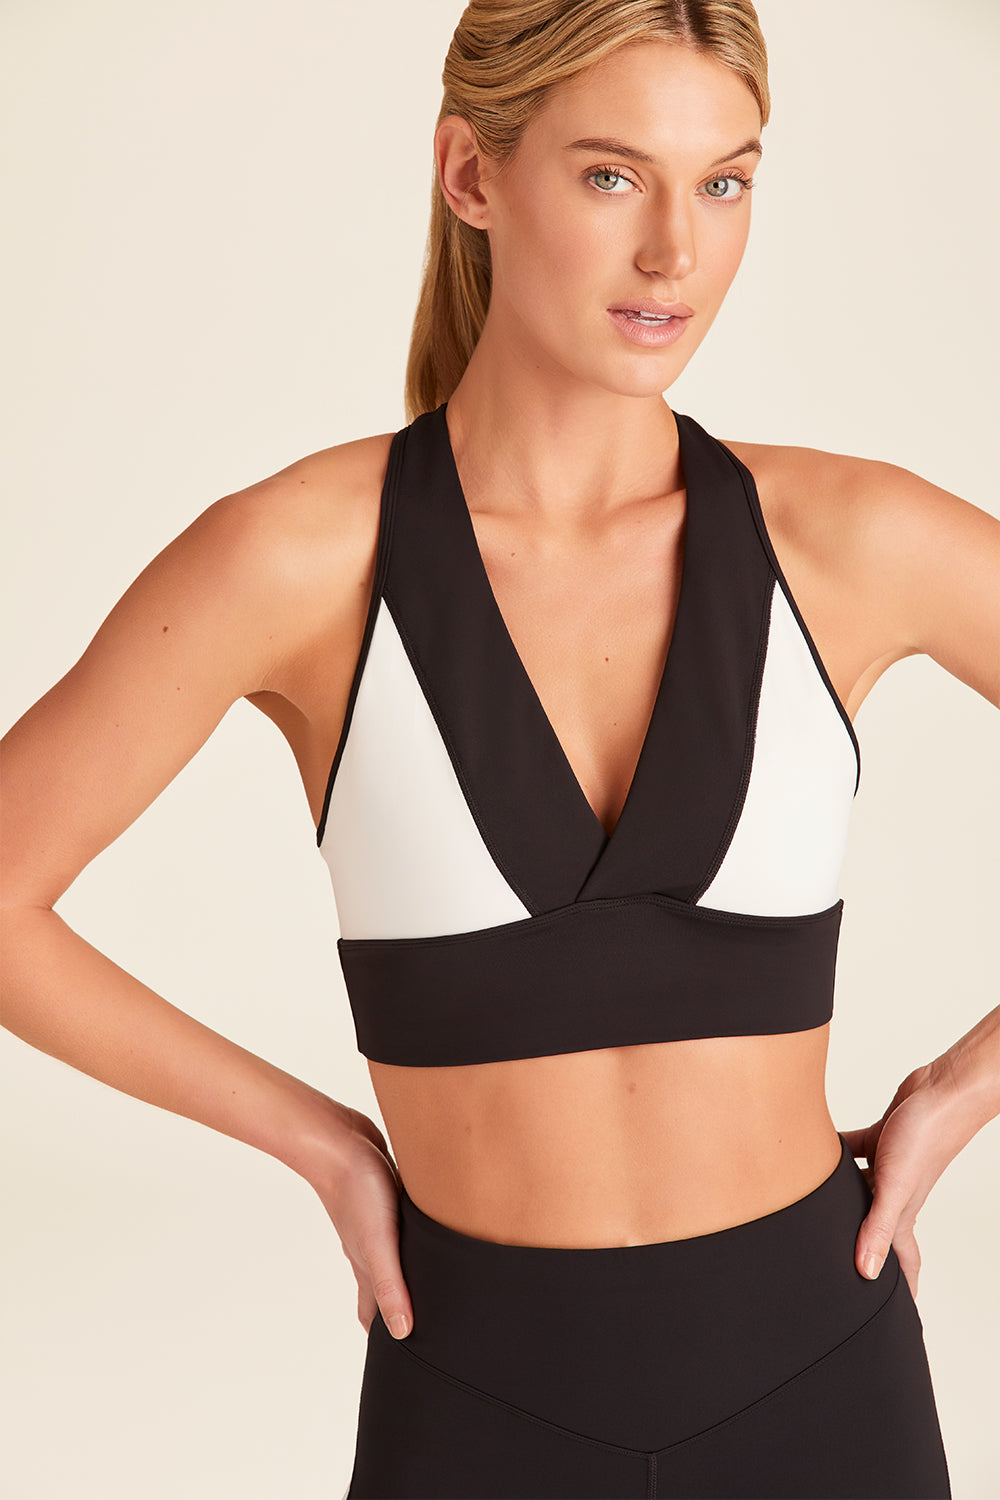 18 Cute Sports Bras to Motivate and Inspire You, In or Out of Gym - The  Breast Life